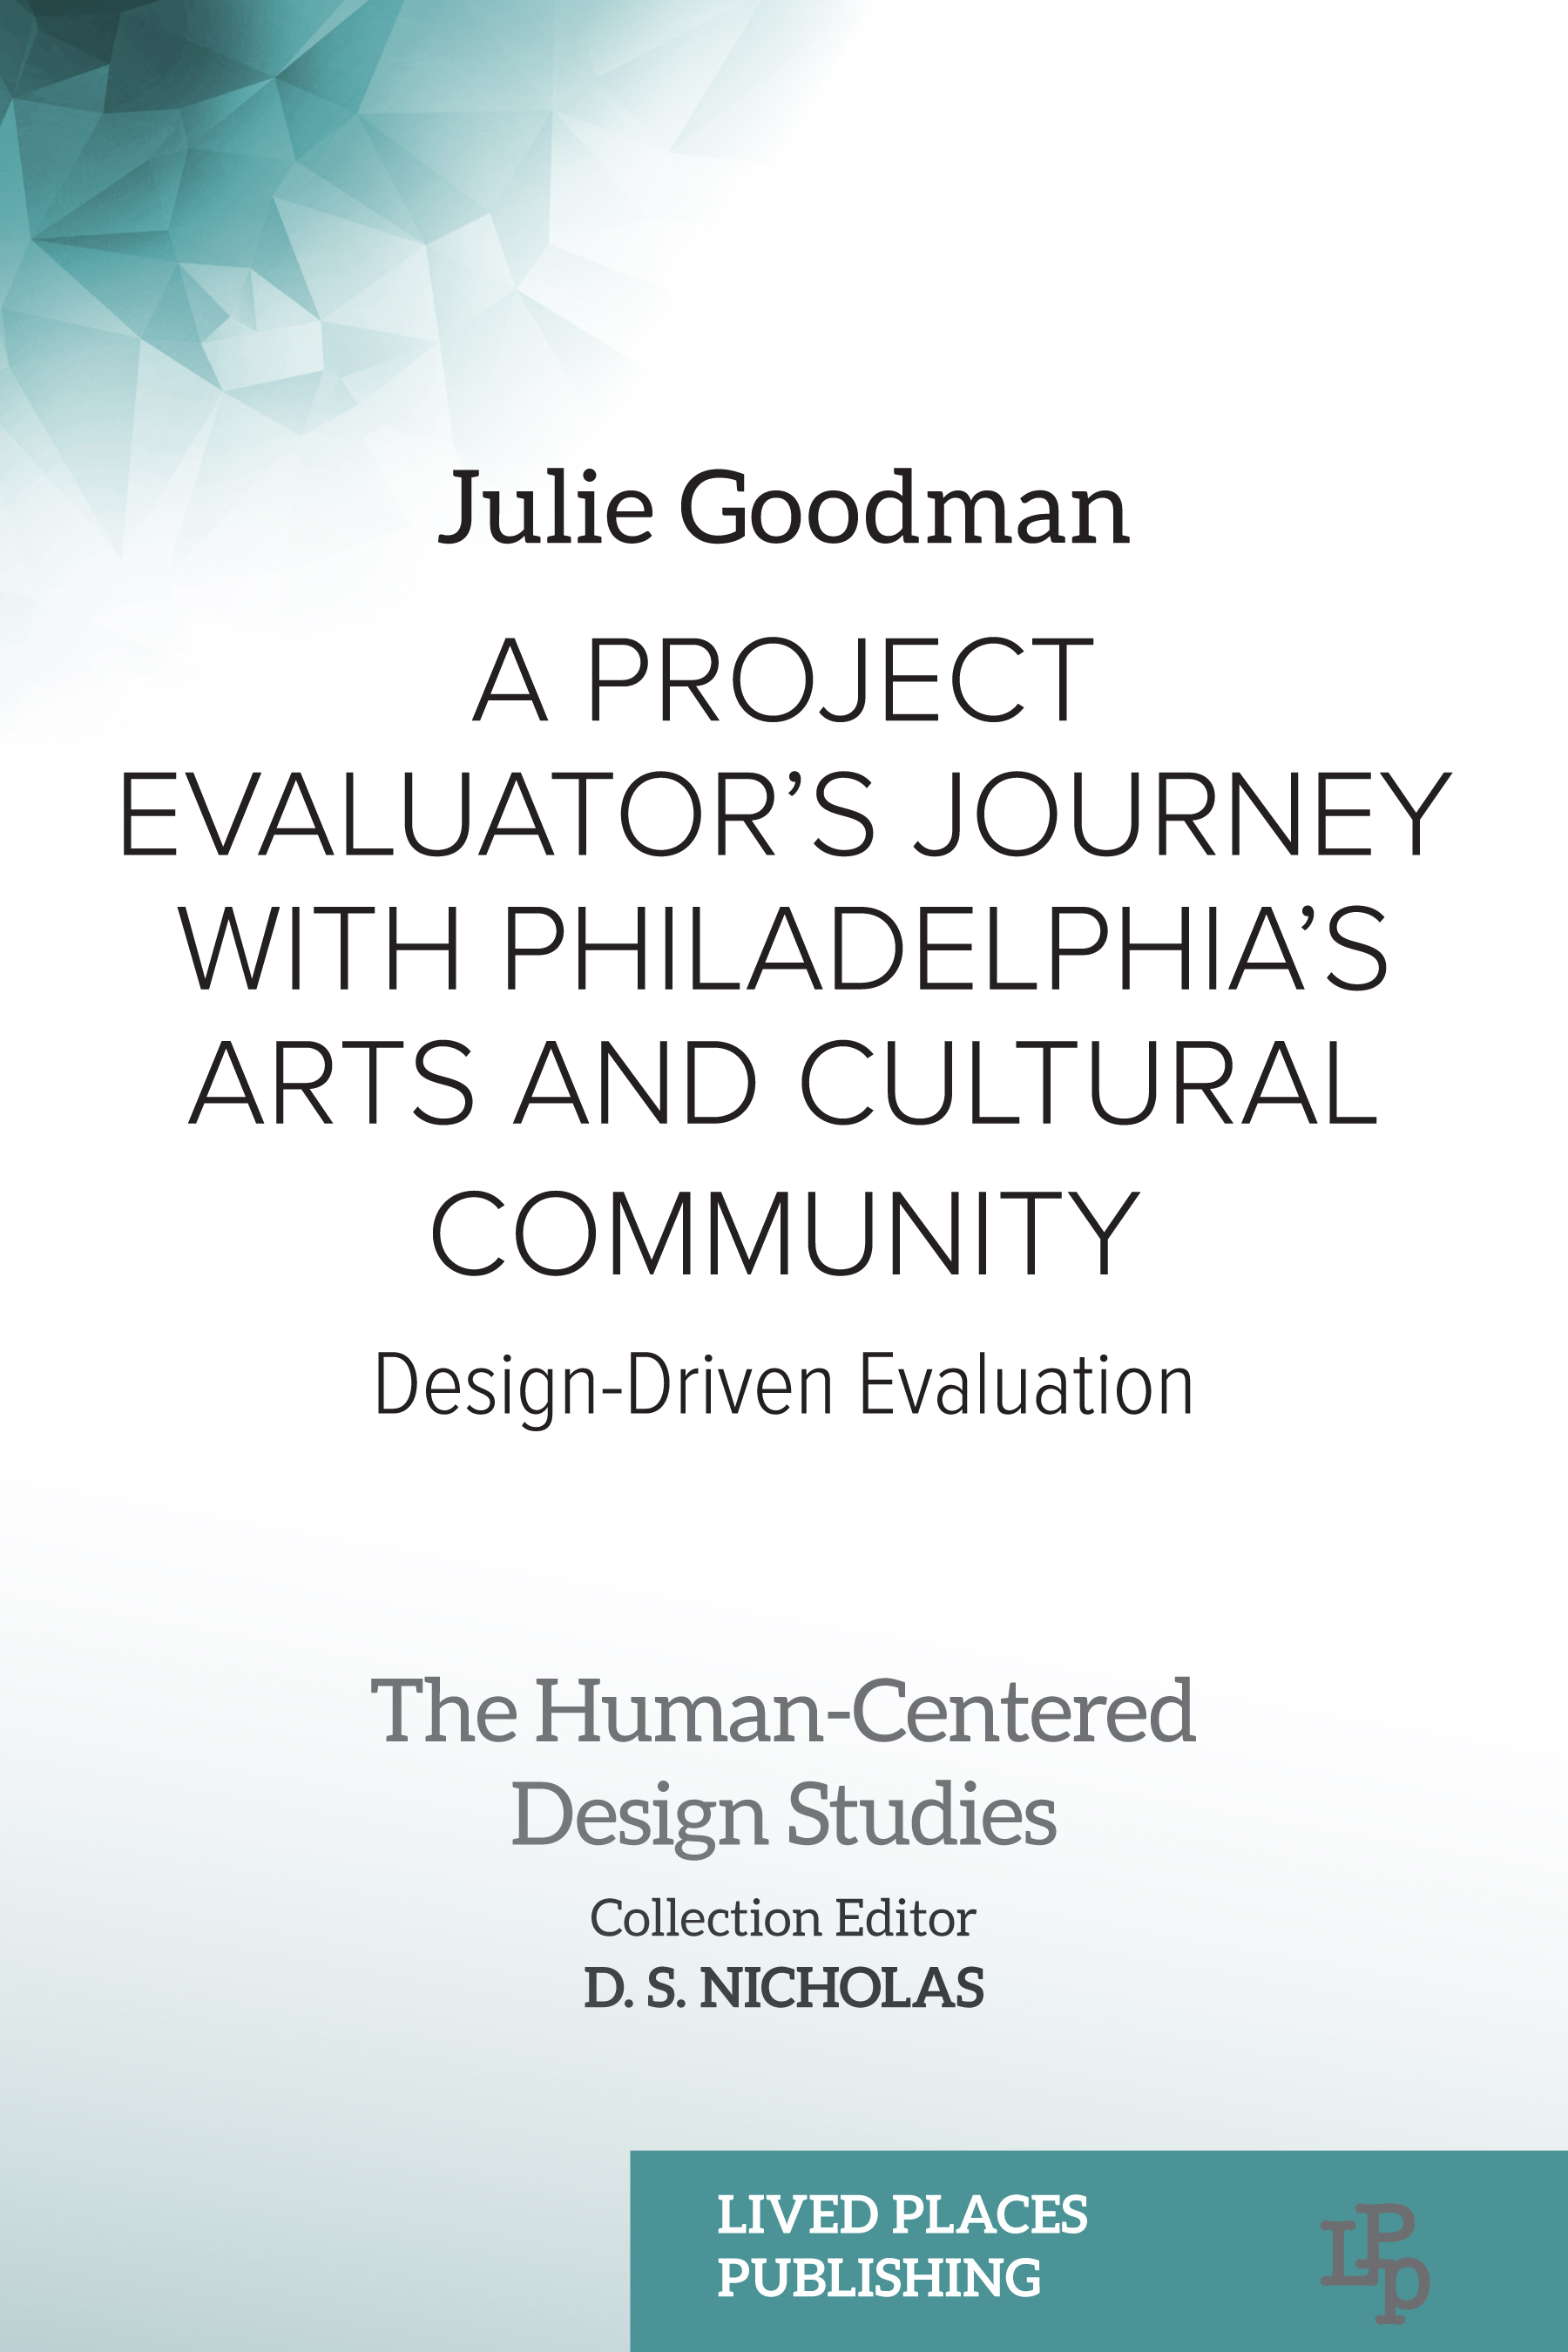 Project Evaluator’s Journey with Philadelphia’s Arts and Cultural Community